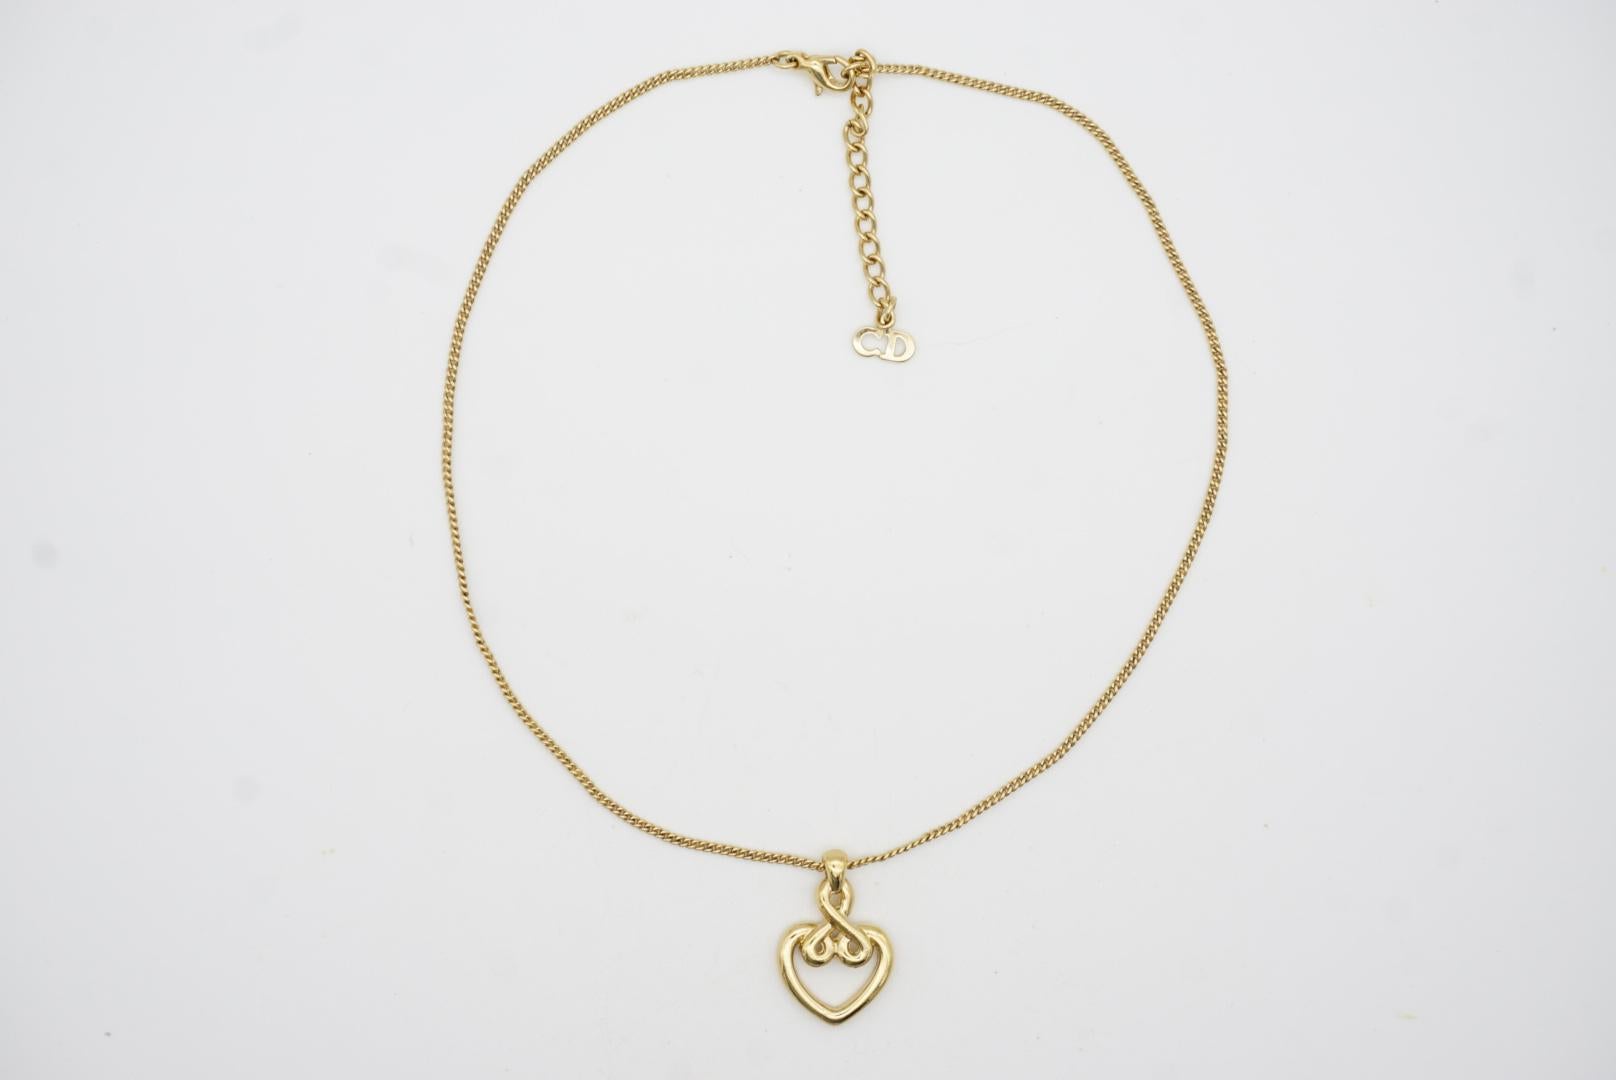 Christian Dior Vintage 1990s Baroque Heart Love Knot Openwork Pendant Necklace For Sale 3